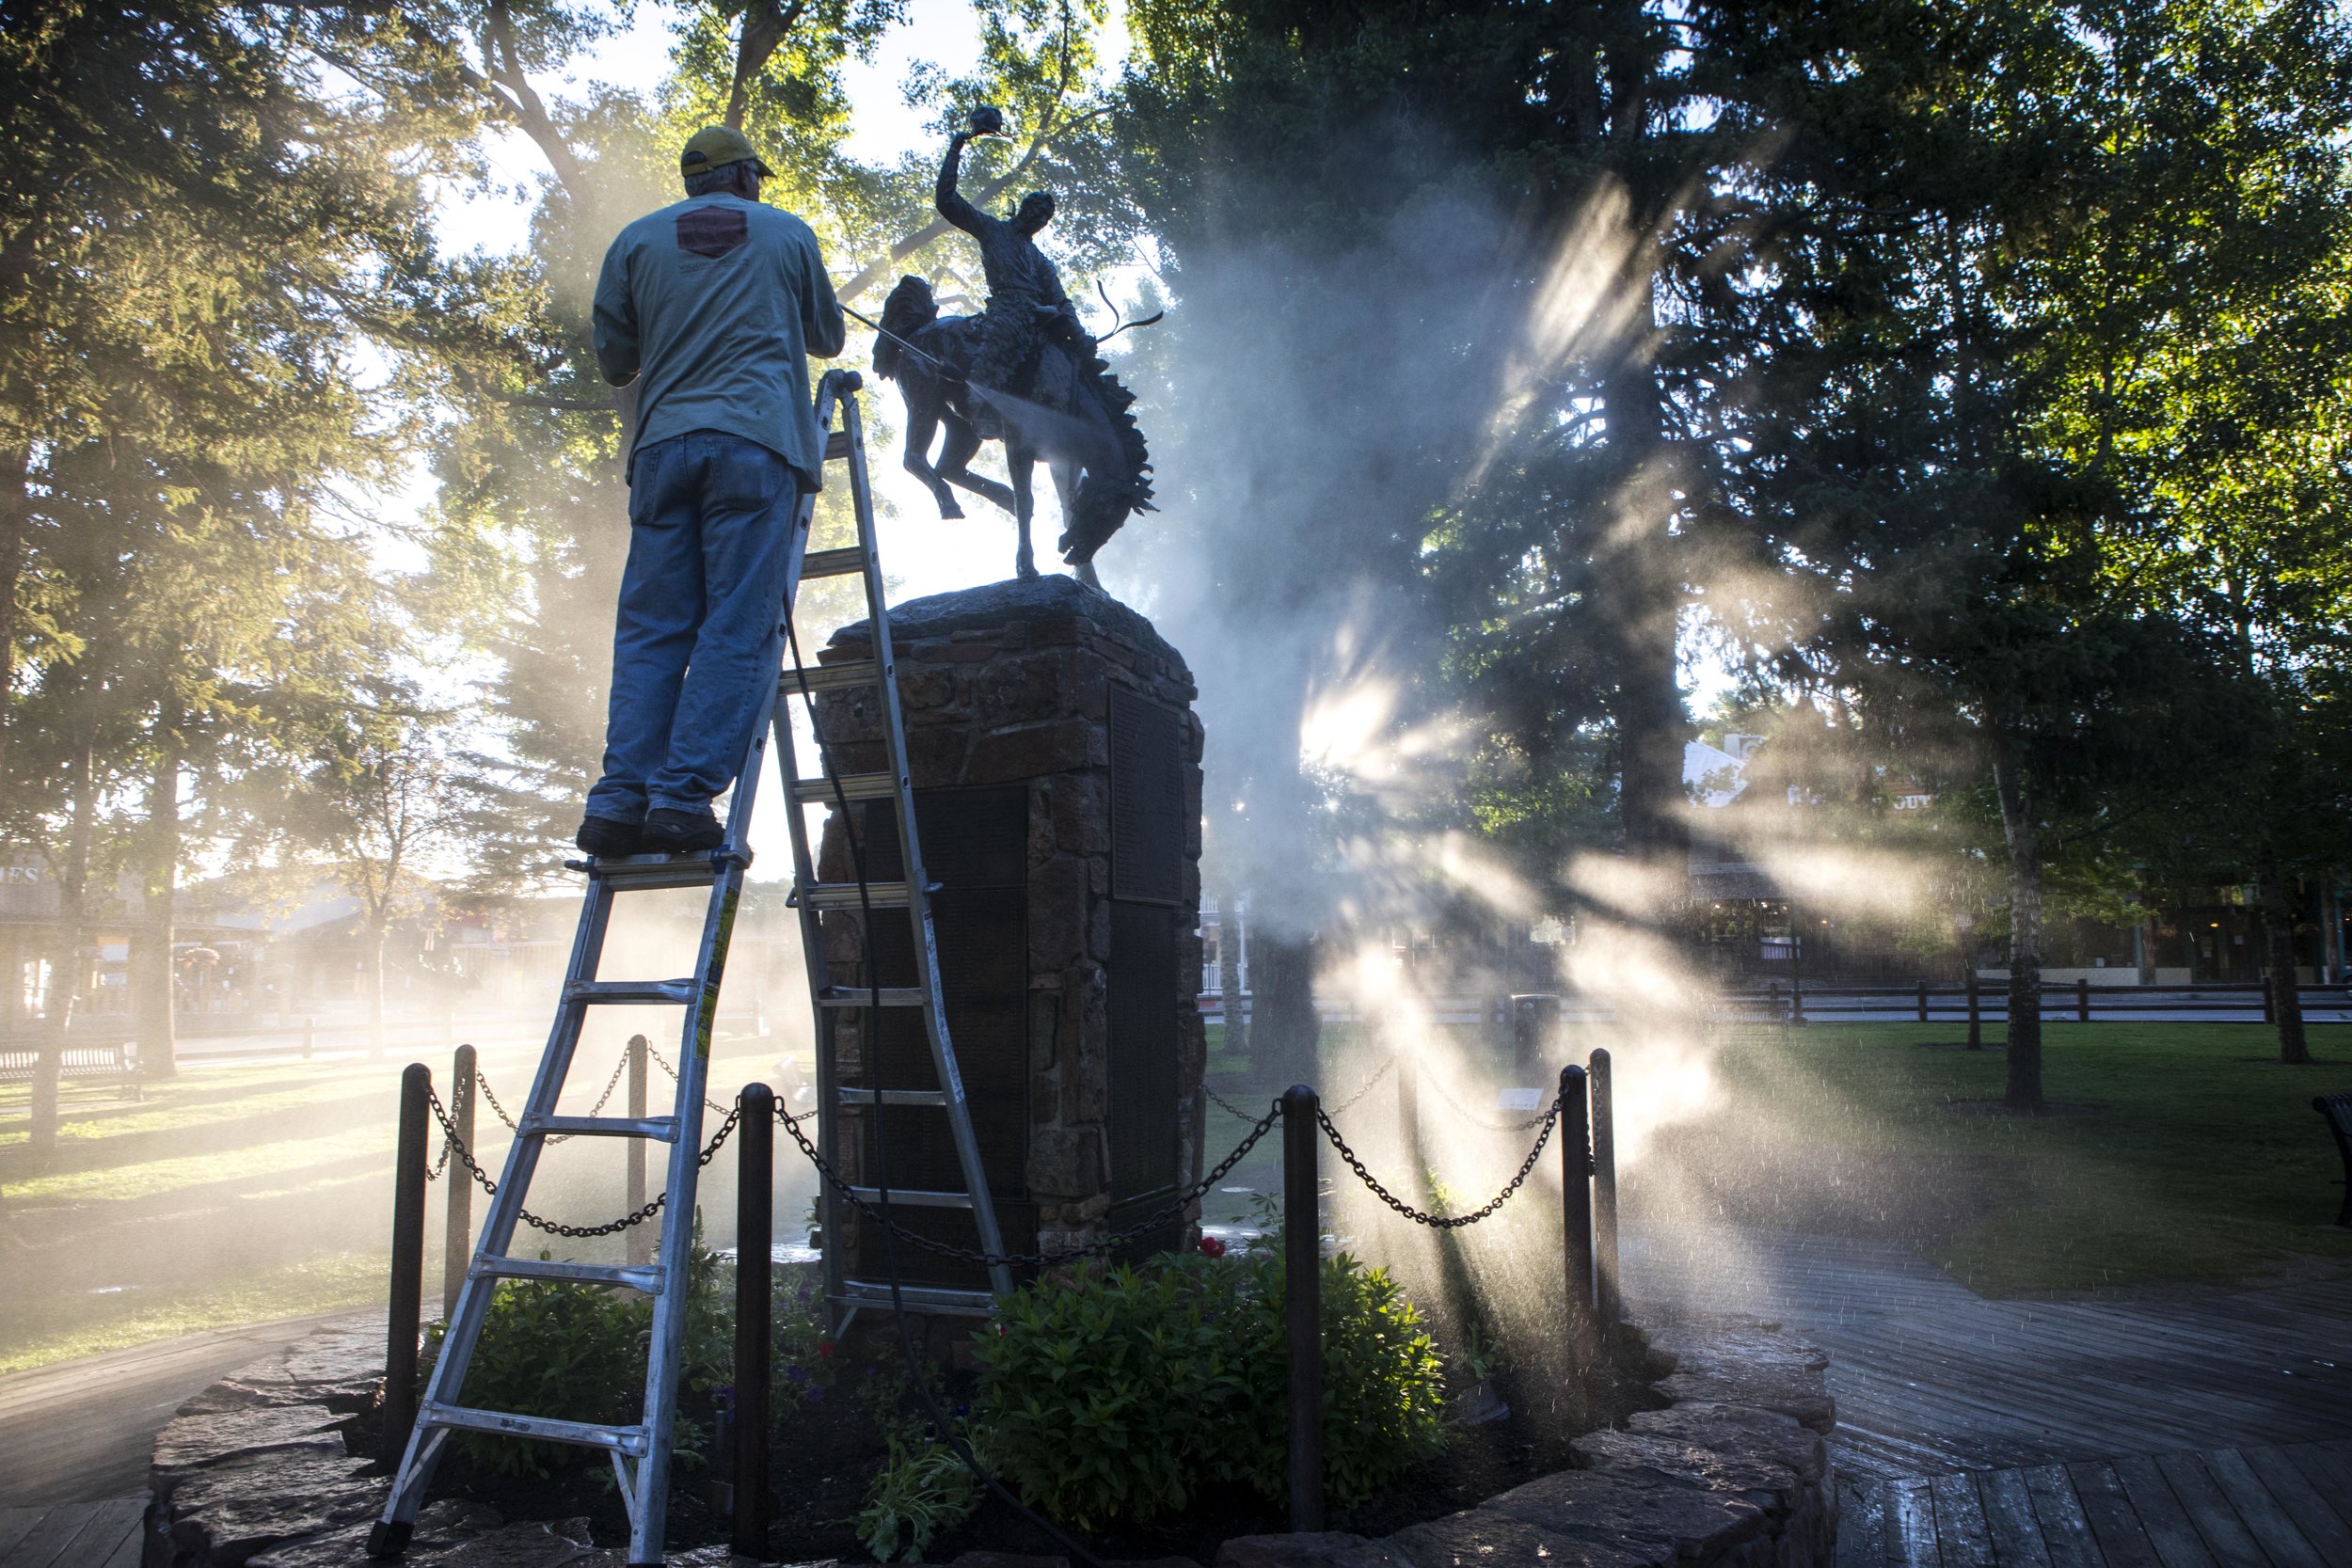  David DeDecker power washes the bucking bronco on top of the Town Square Veterans Monument as the early morning sun peeked through the trees on June 24, 2018 in Jackson, Wyo. The monument honors area service personnel from World War I to Operation D